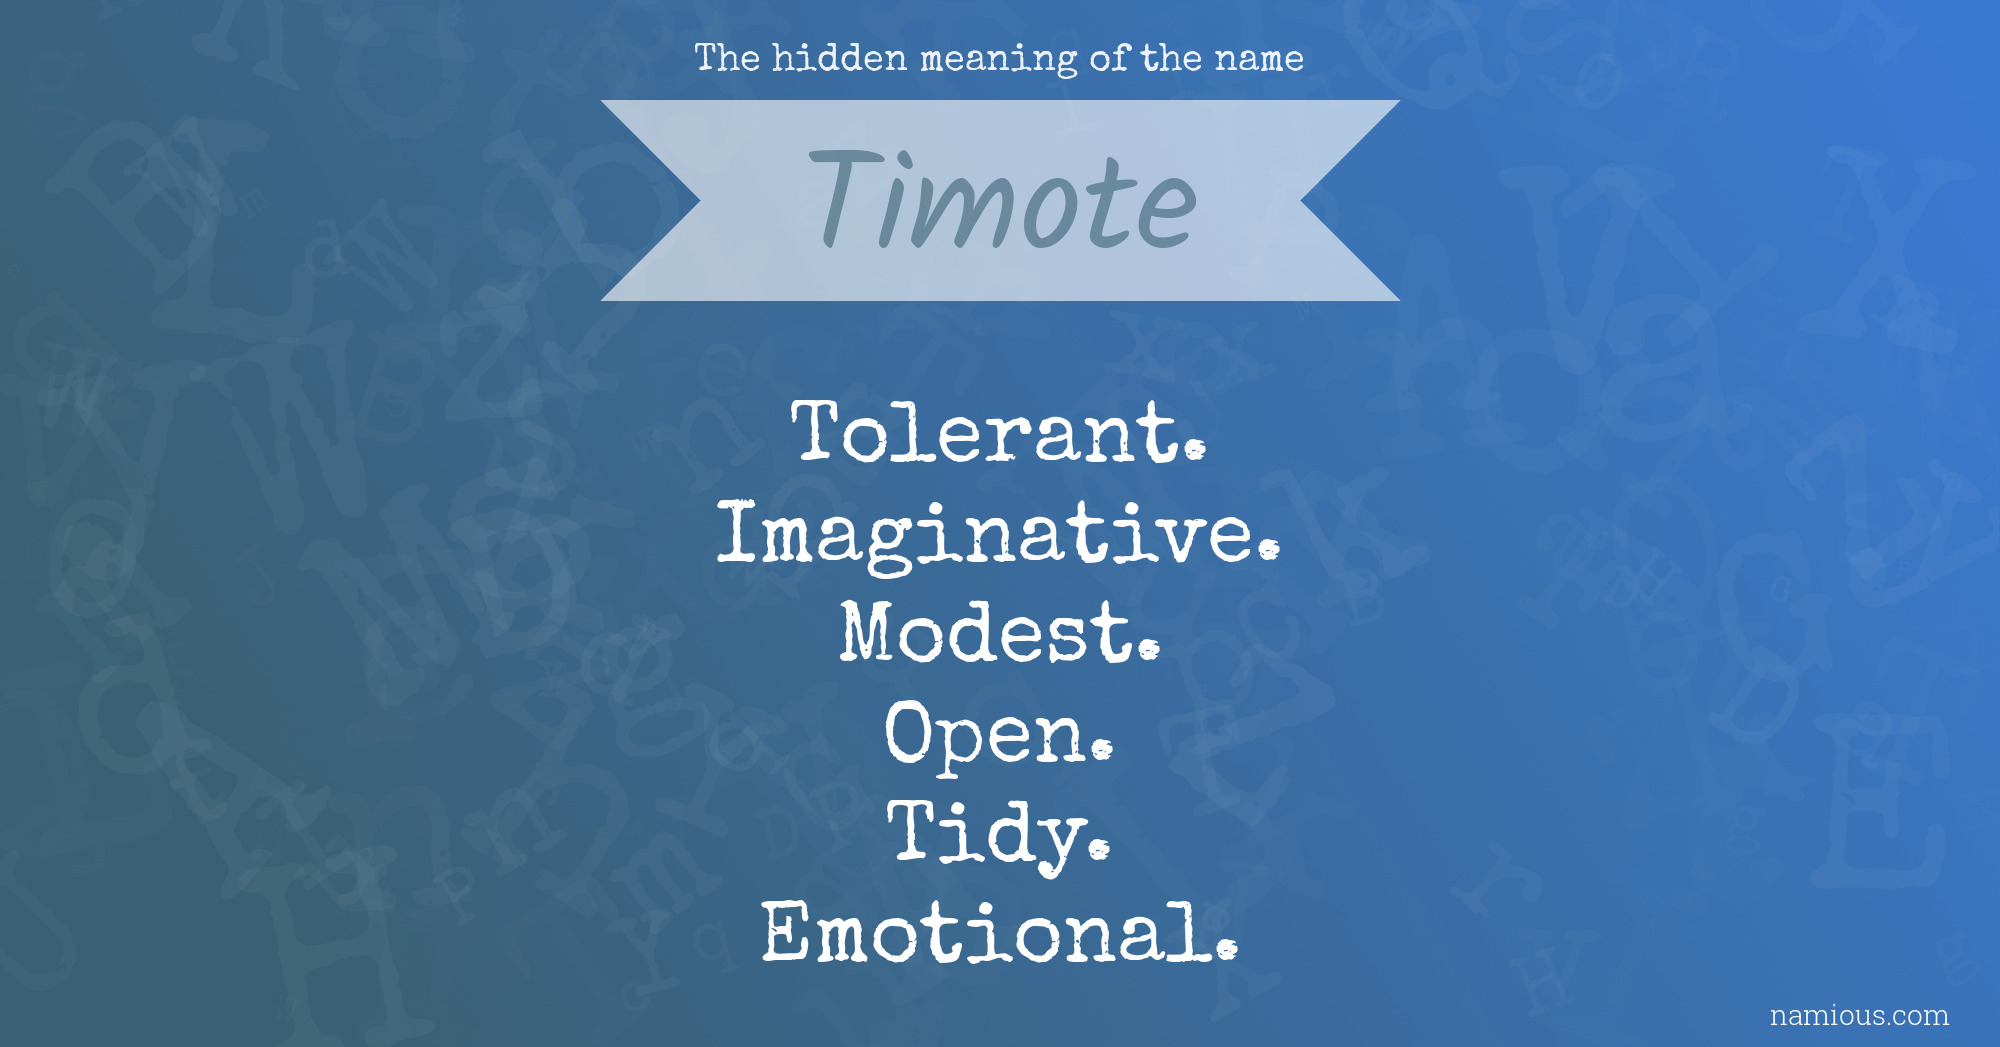 The hidden meaning of the name Timote